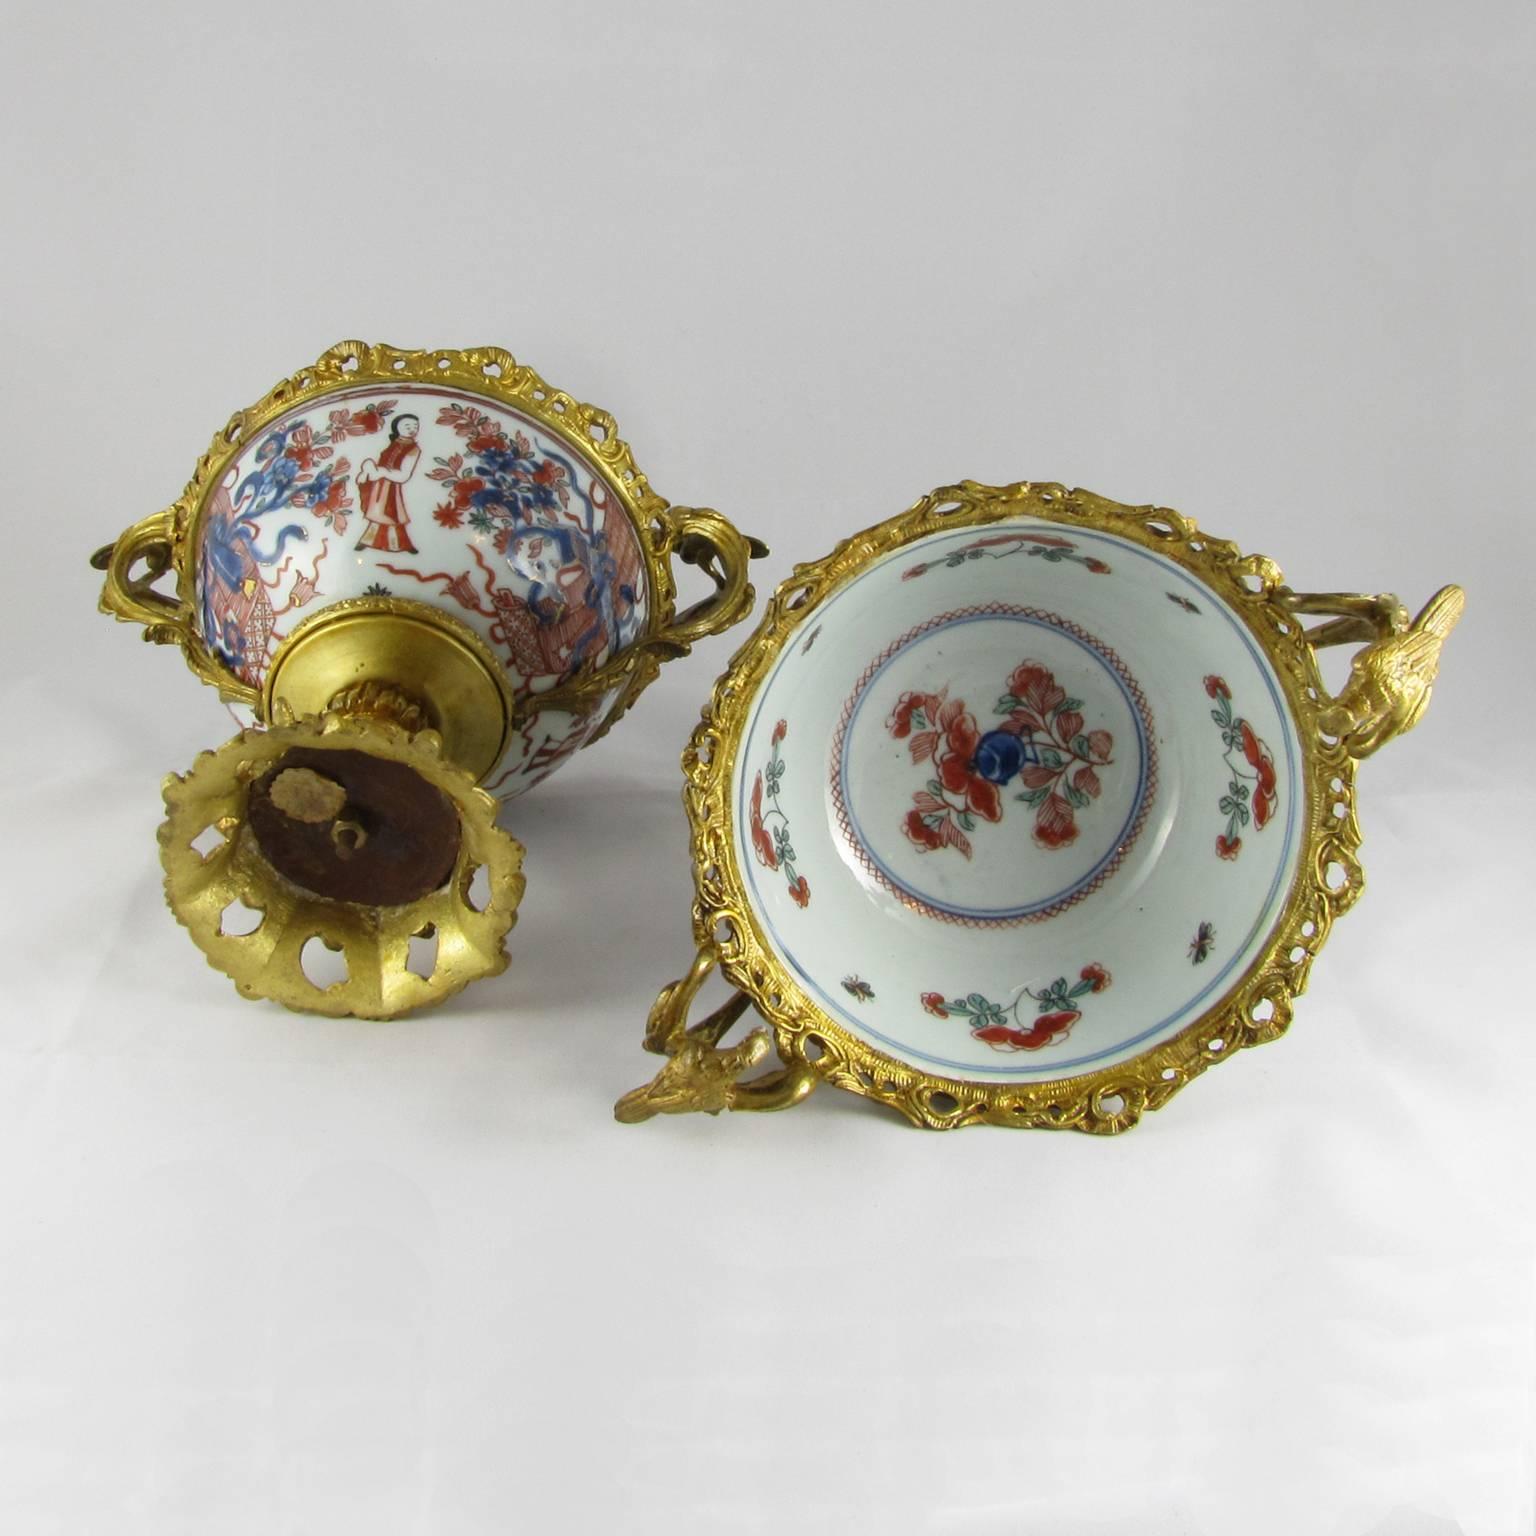 Two Bronze-Mounted Japanese Porcelain Imari Bowls with Bronze Birds For Sale 2